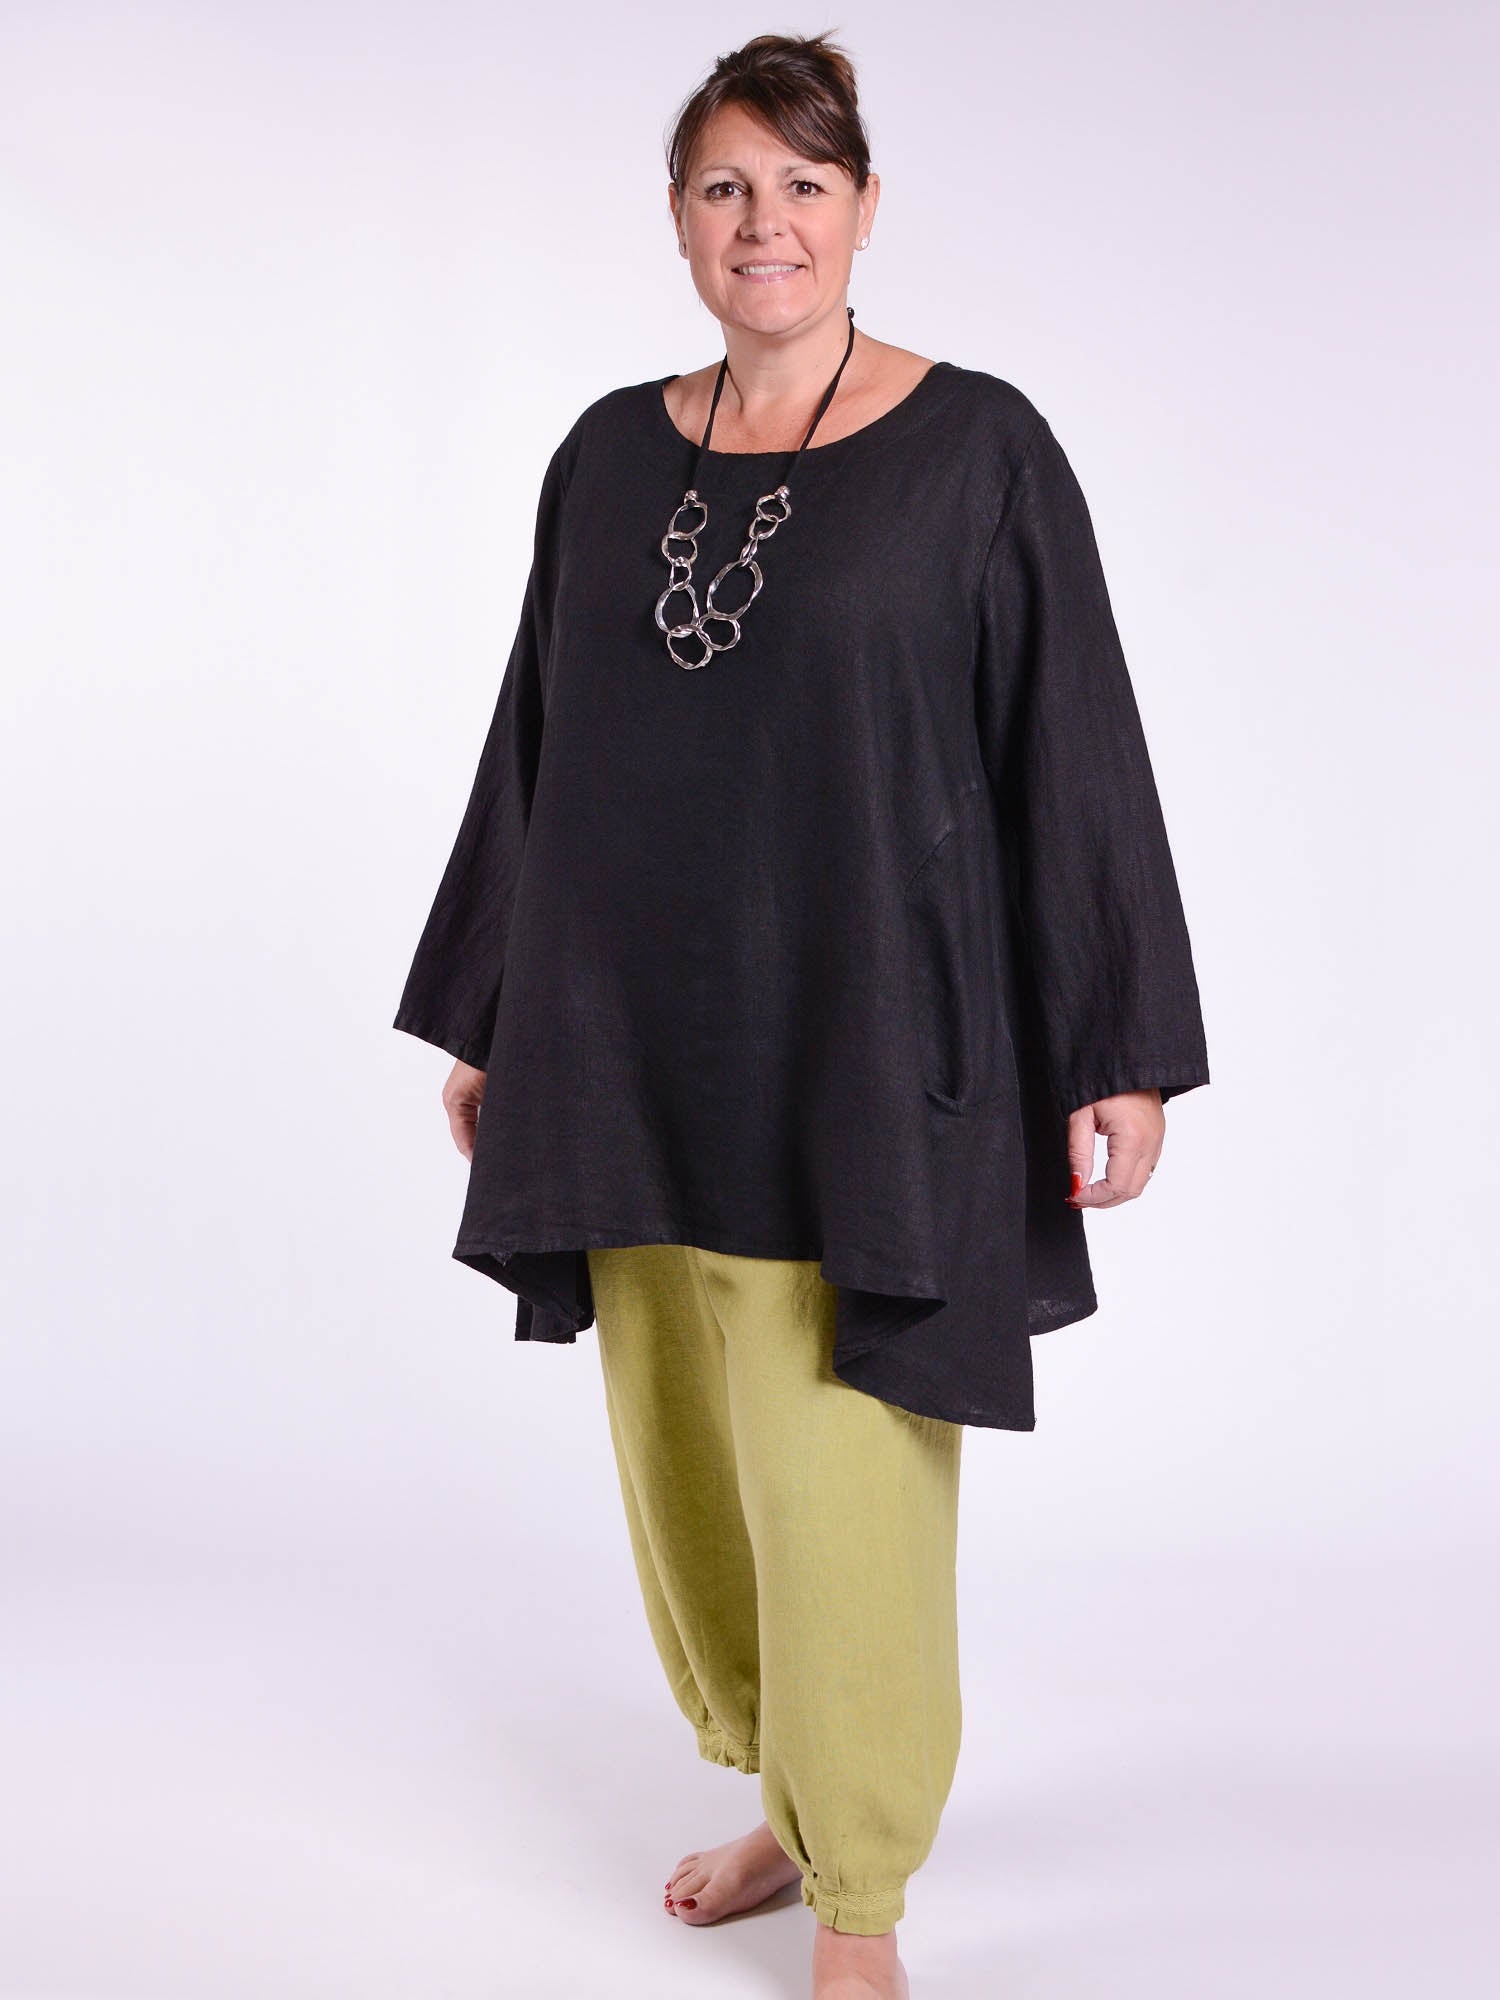 Lagenlook Heavy Linen Quirky Tunic - 9415, Tops & Shirts, Pure Plus Clothing, Lagenlook Clothing, Plus Size Fashion, Over 50 Fashion